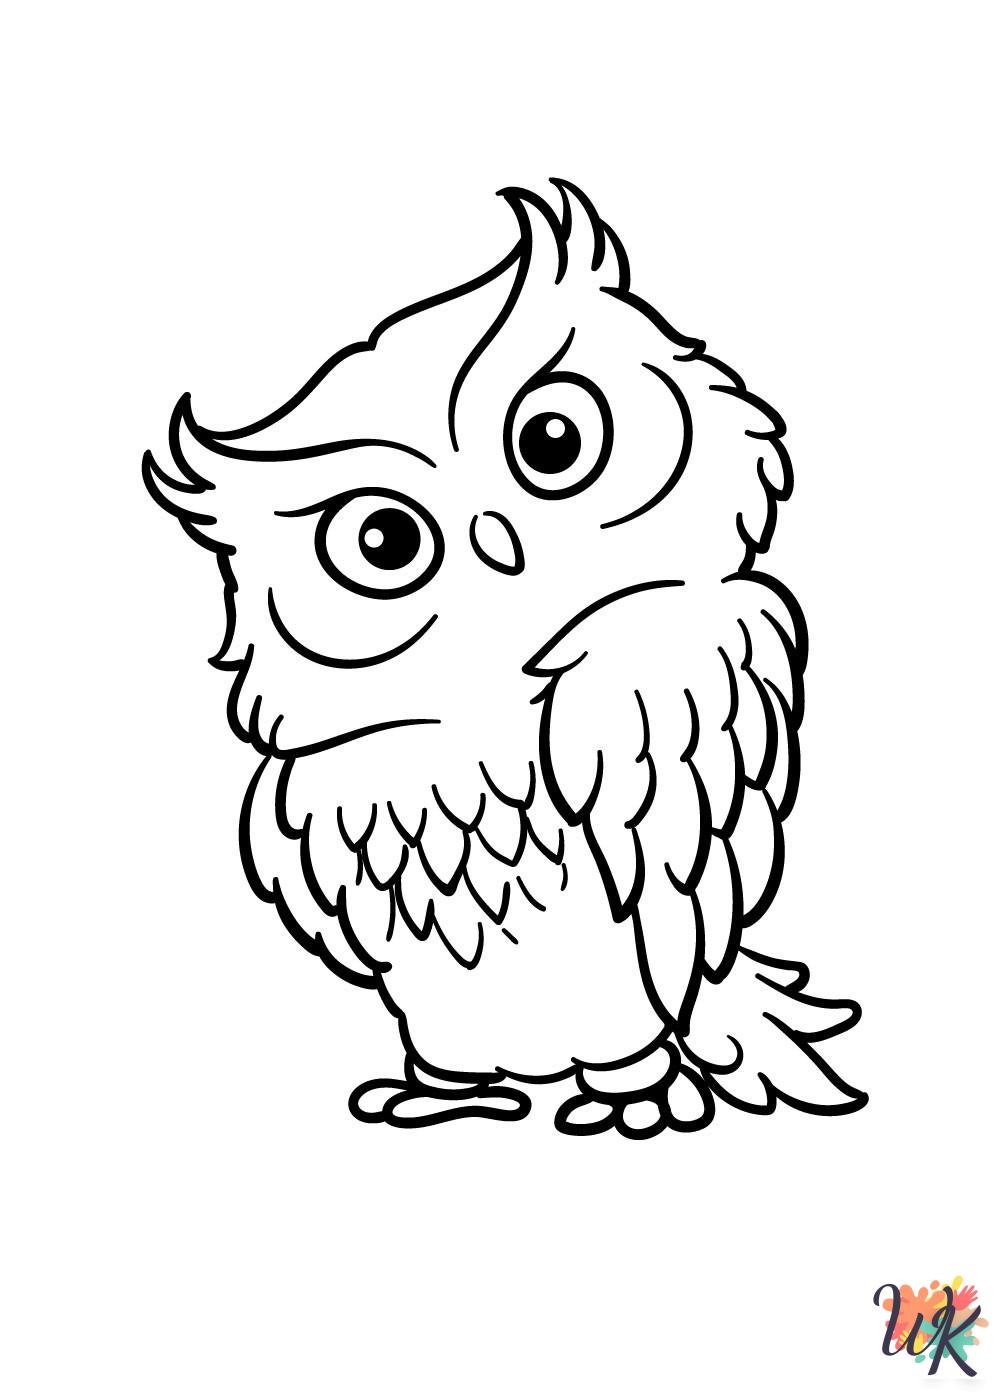 free full size printable Owl coloring pages for adults pdf